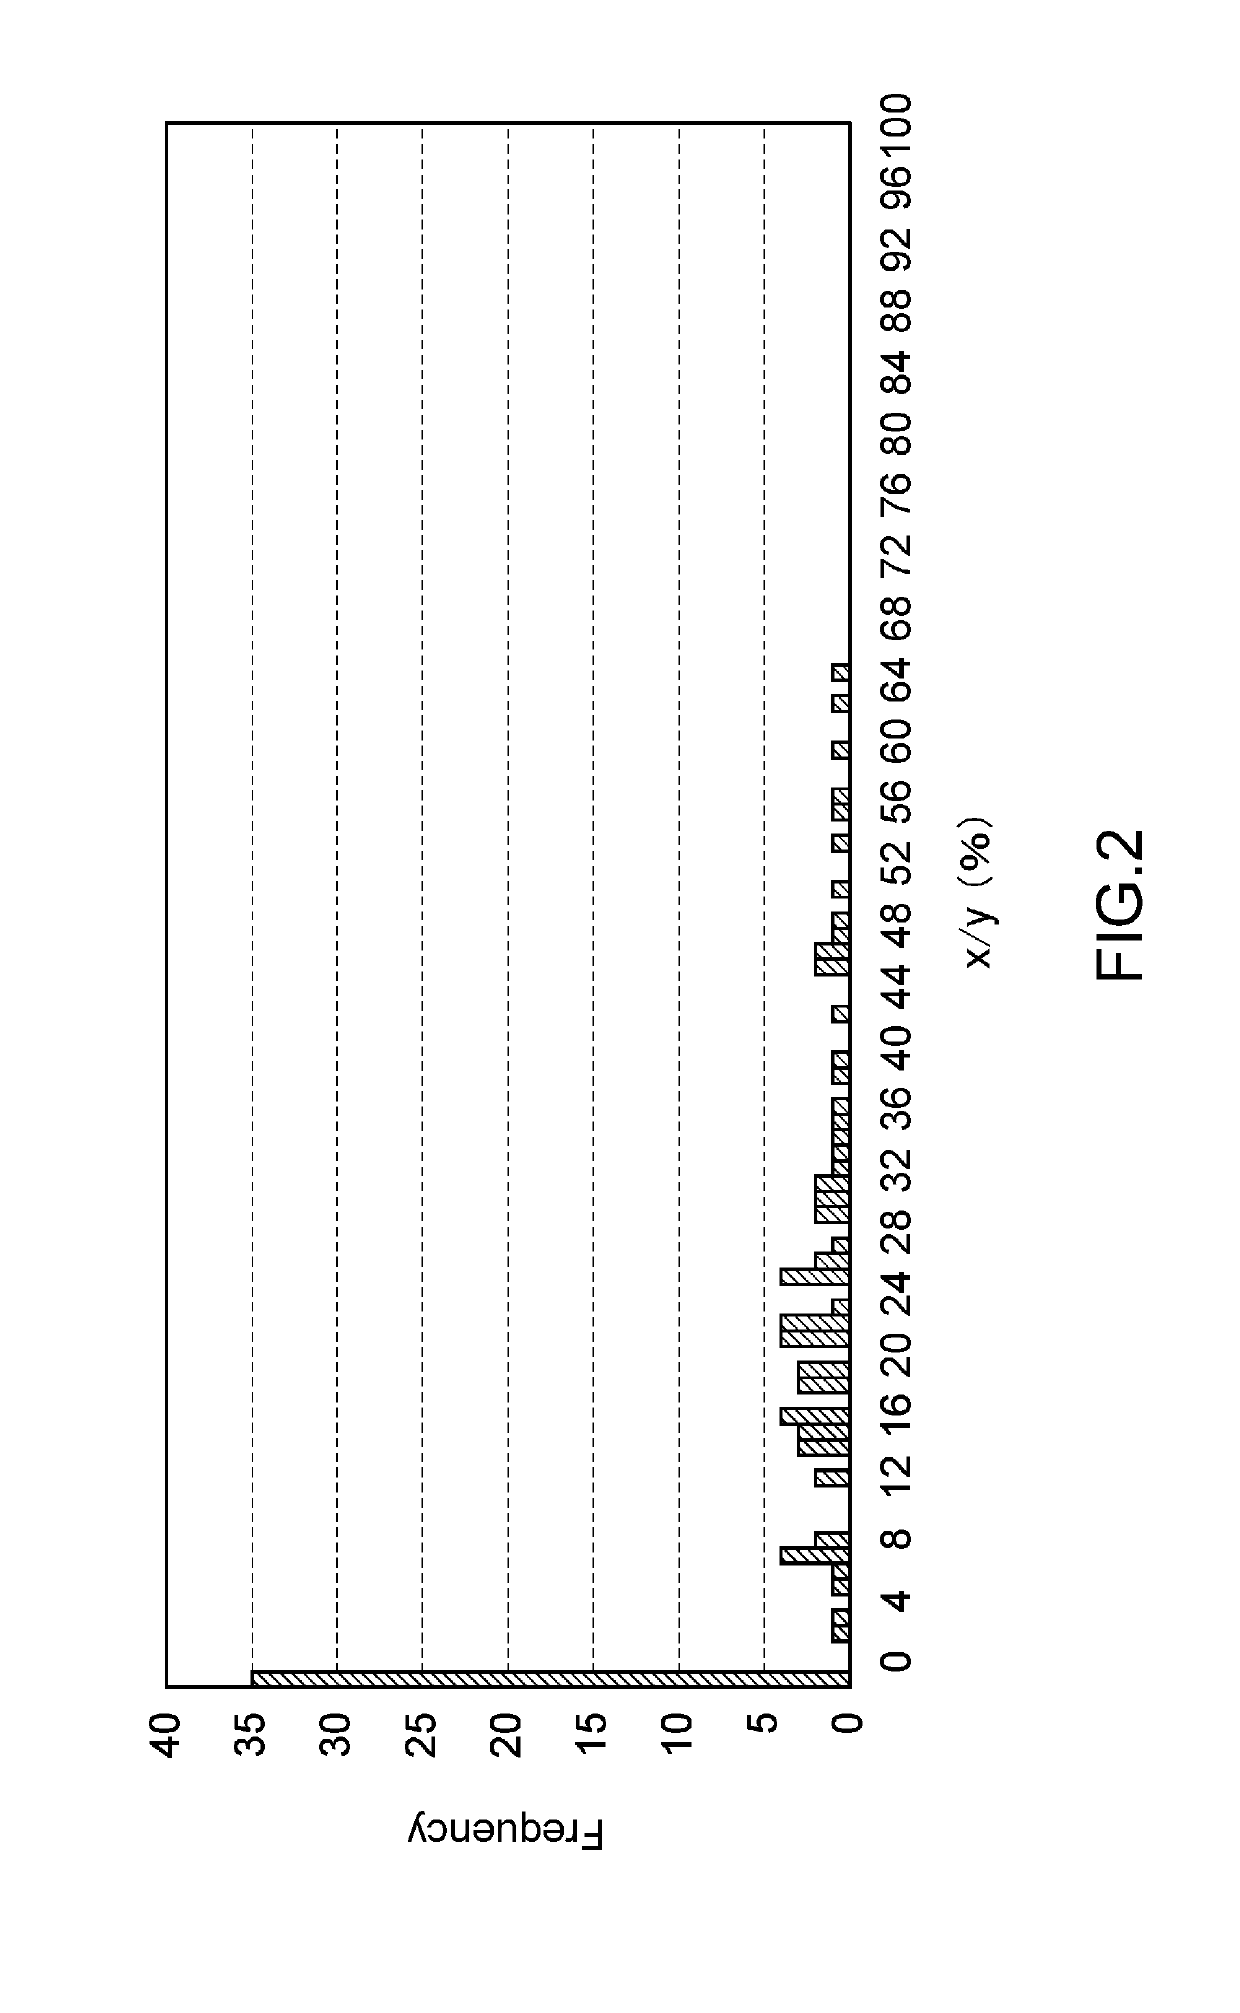 Composite molding composition including fibroin-like protein, and method for producing composite molding composition